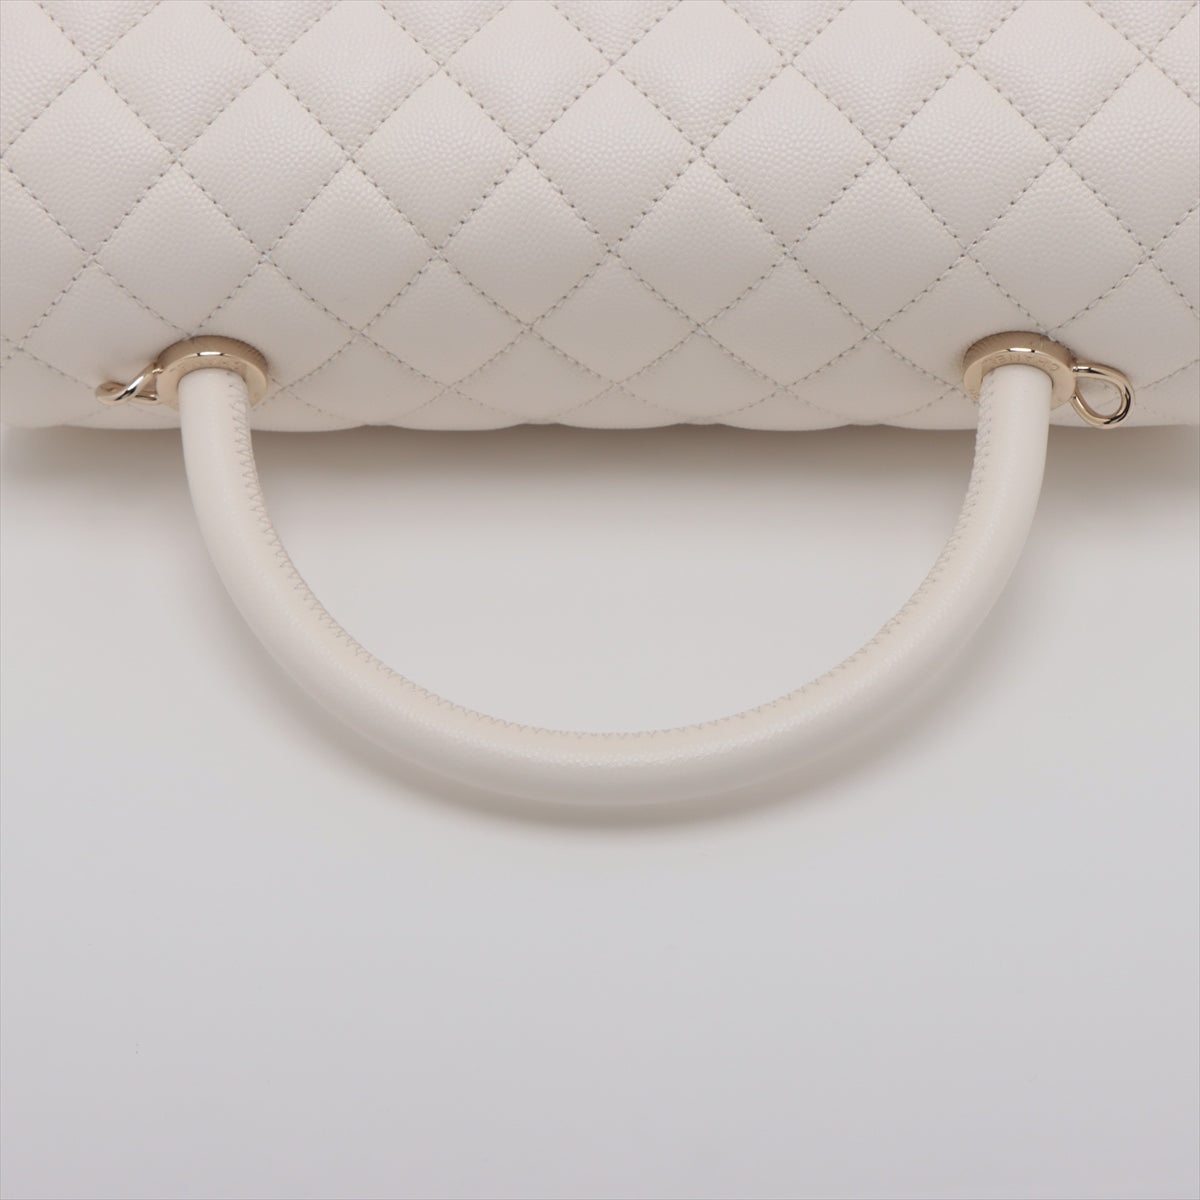 Chanel Coco handle 29 S Caviar Skin 2 Way Shoulder Bag White Gold Metal Fittings A92991